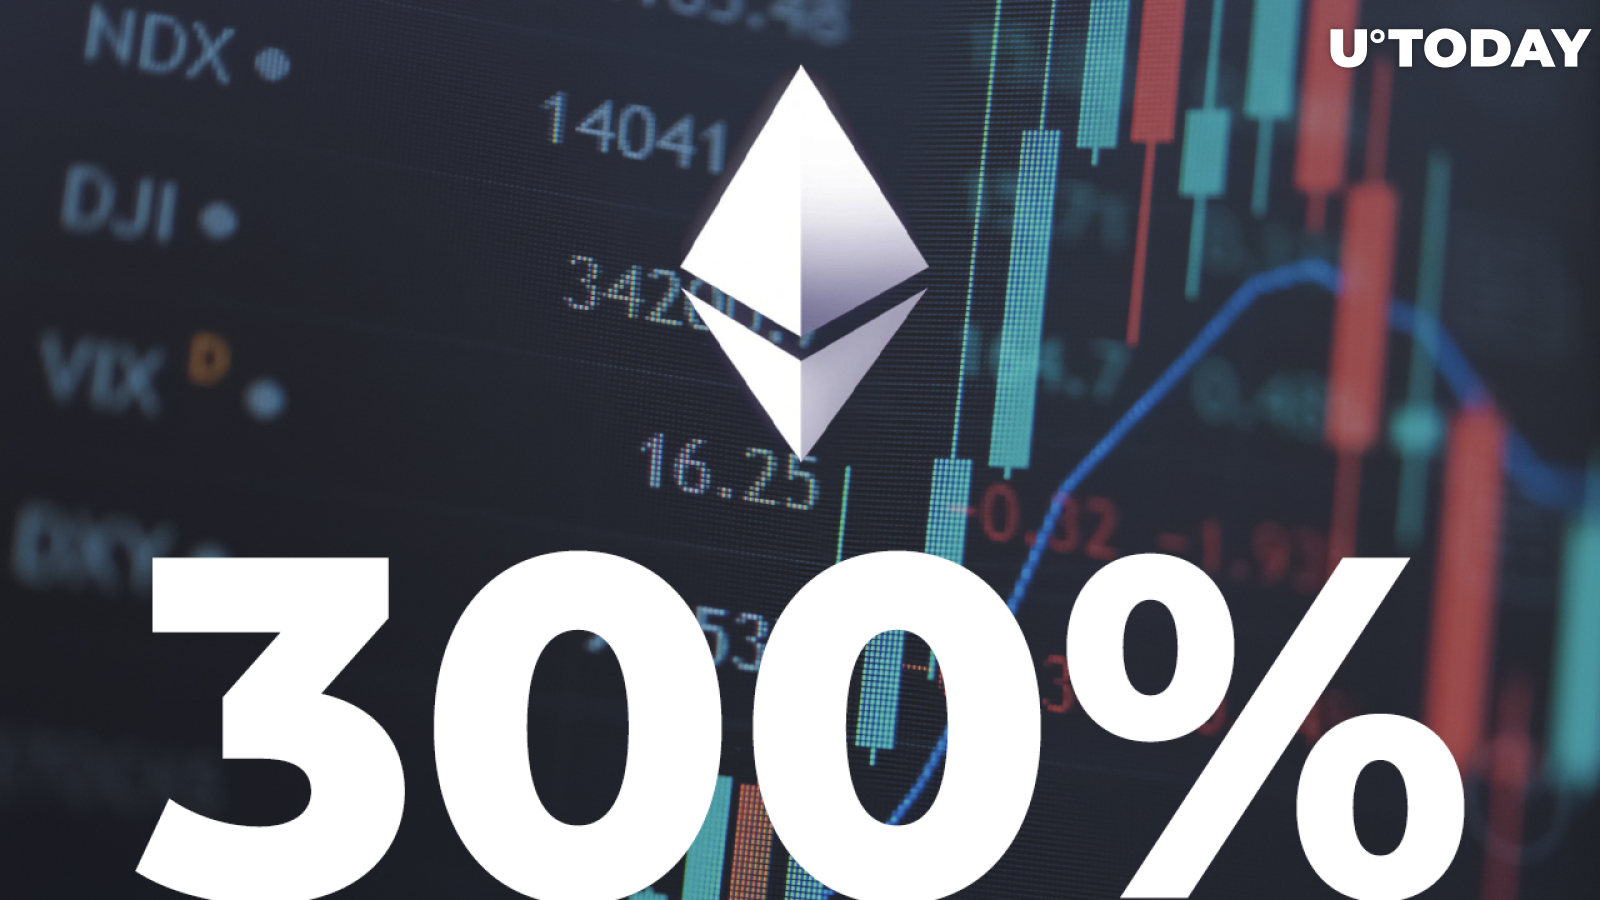 Ether Price Could Soar 300% by End of 2021, Says Raoul Pal